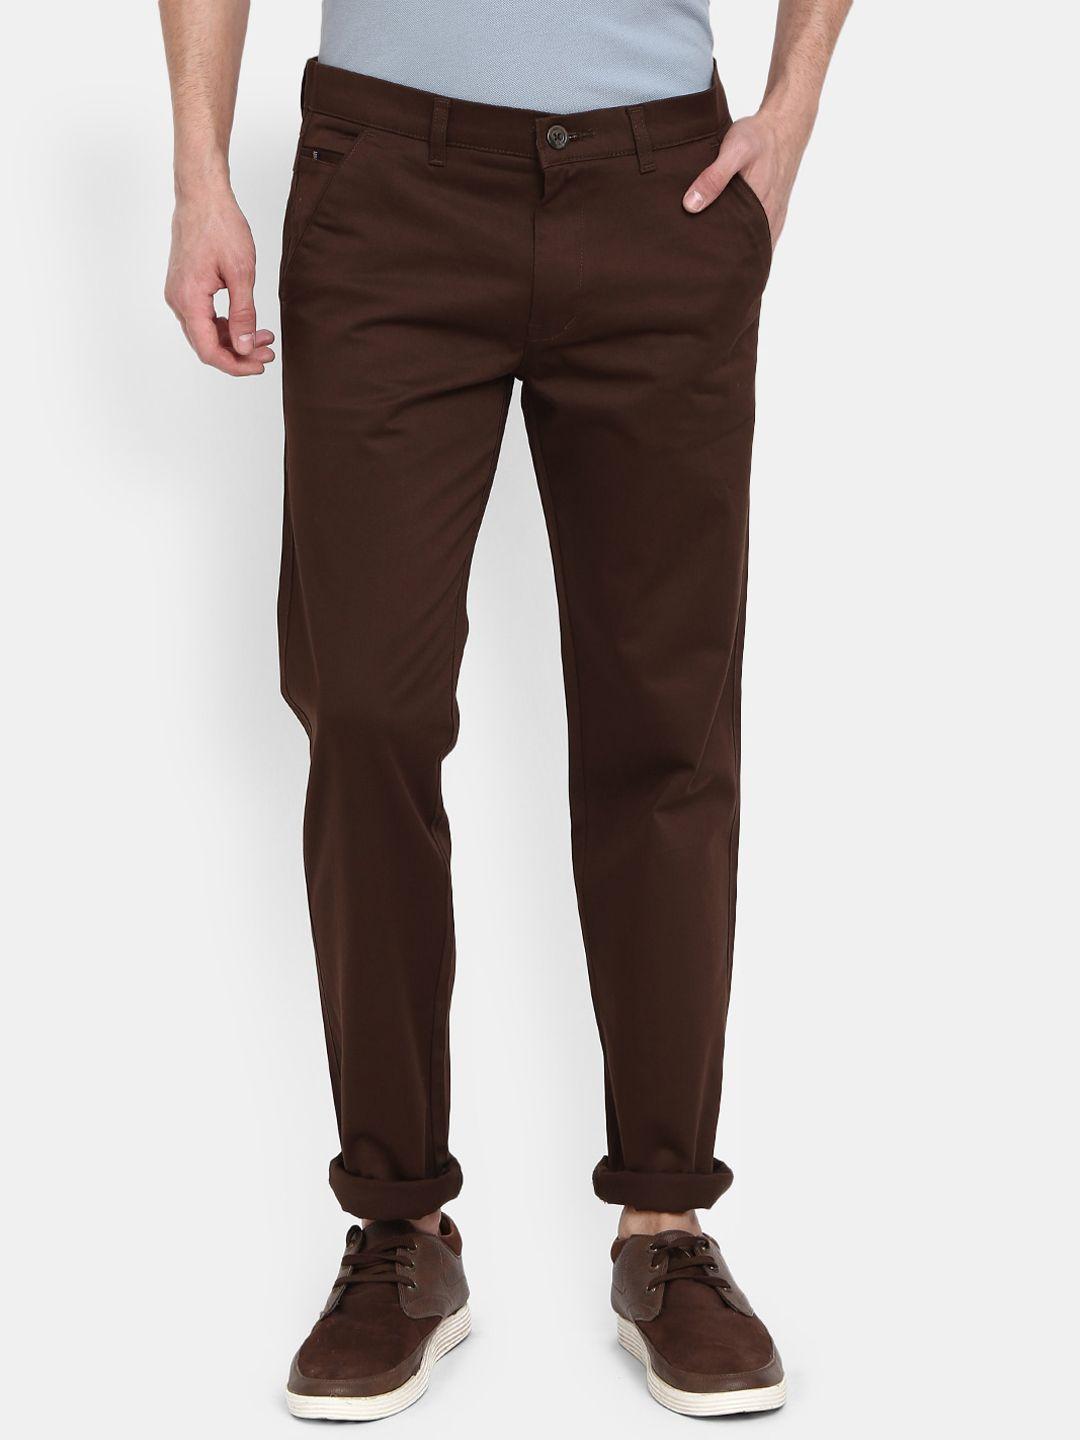 v-mart-men-brown-classic-slim-fit-chinos-trousers